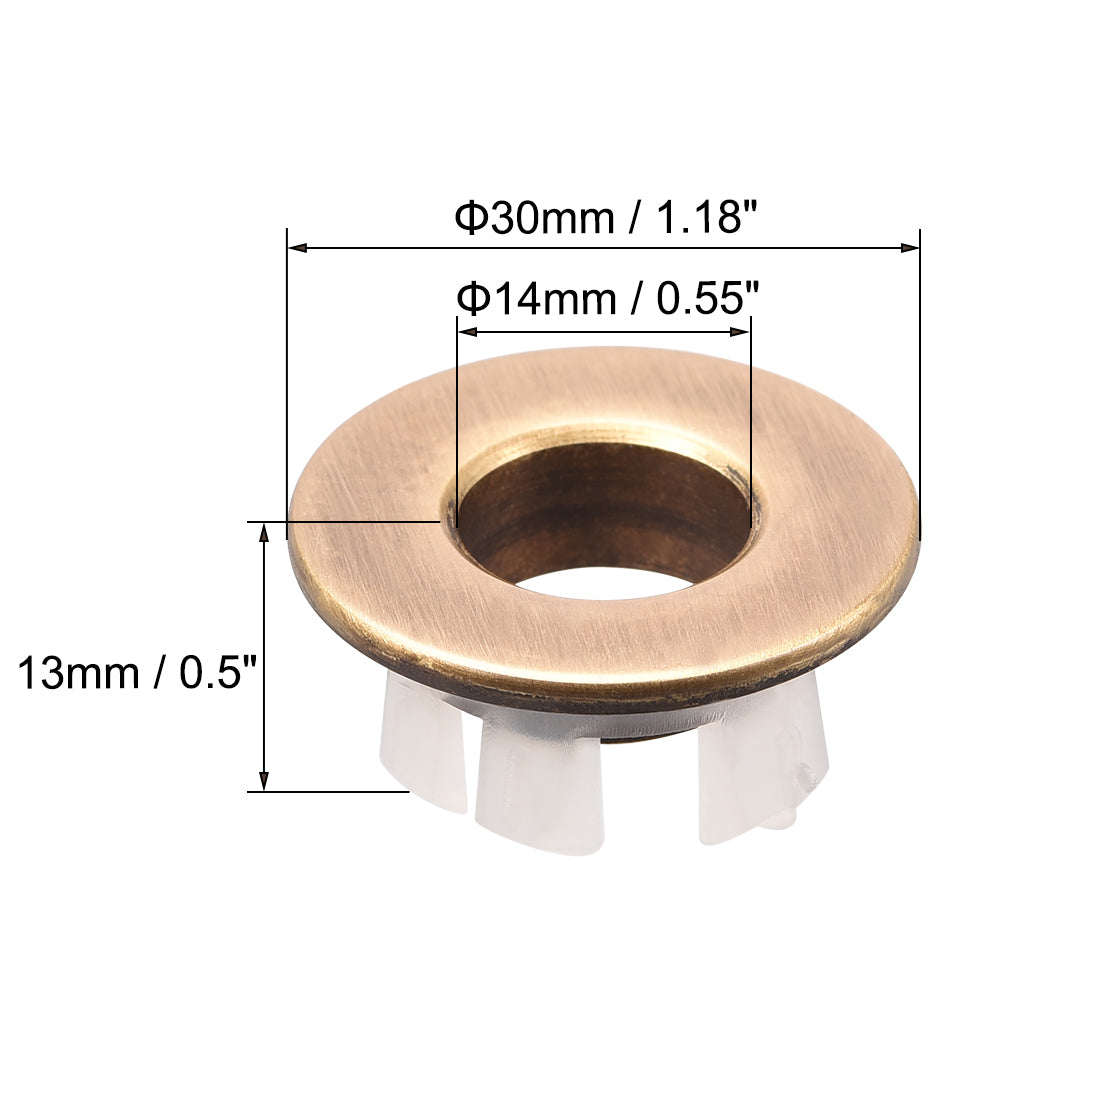 uxcell Uxcell Sink Overflow Covers Kitchen Basin Trim Round Hole Caps Insert Spares Bronze Tone 3 Pcs